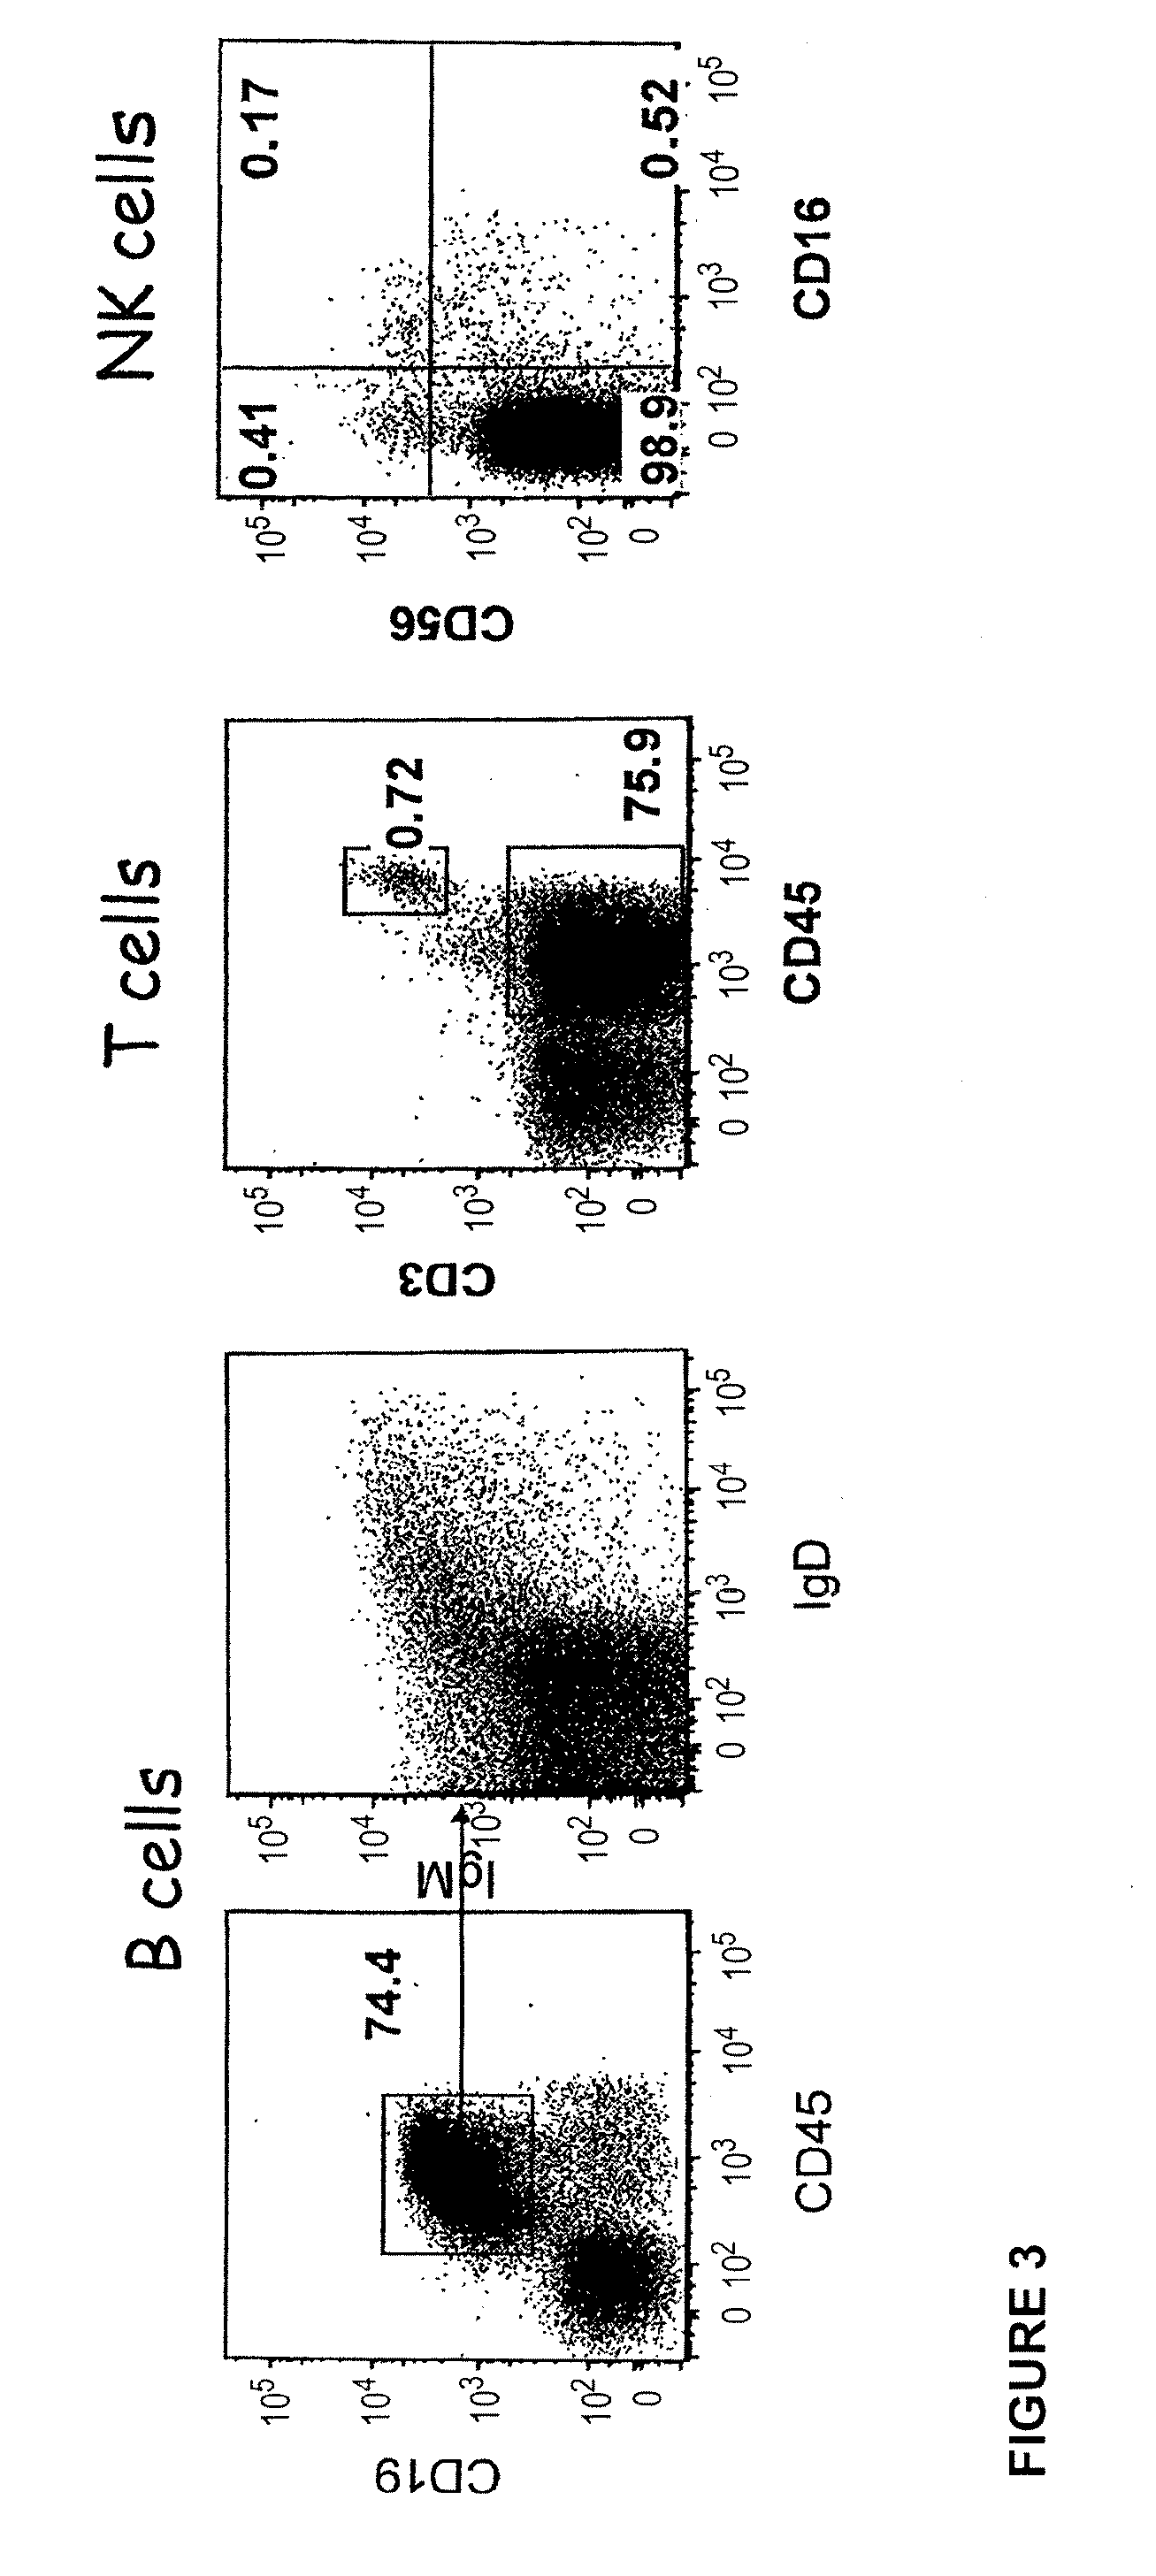 Transgenic Immunodeficient Mouse Expressing Human SIRP-alpha